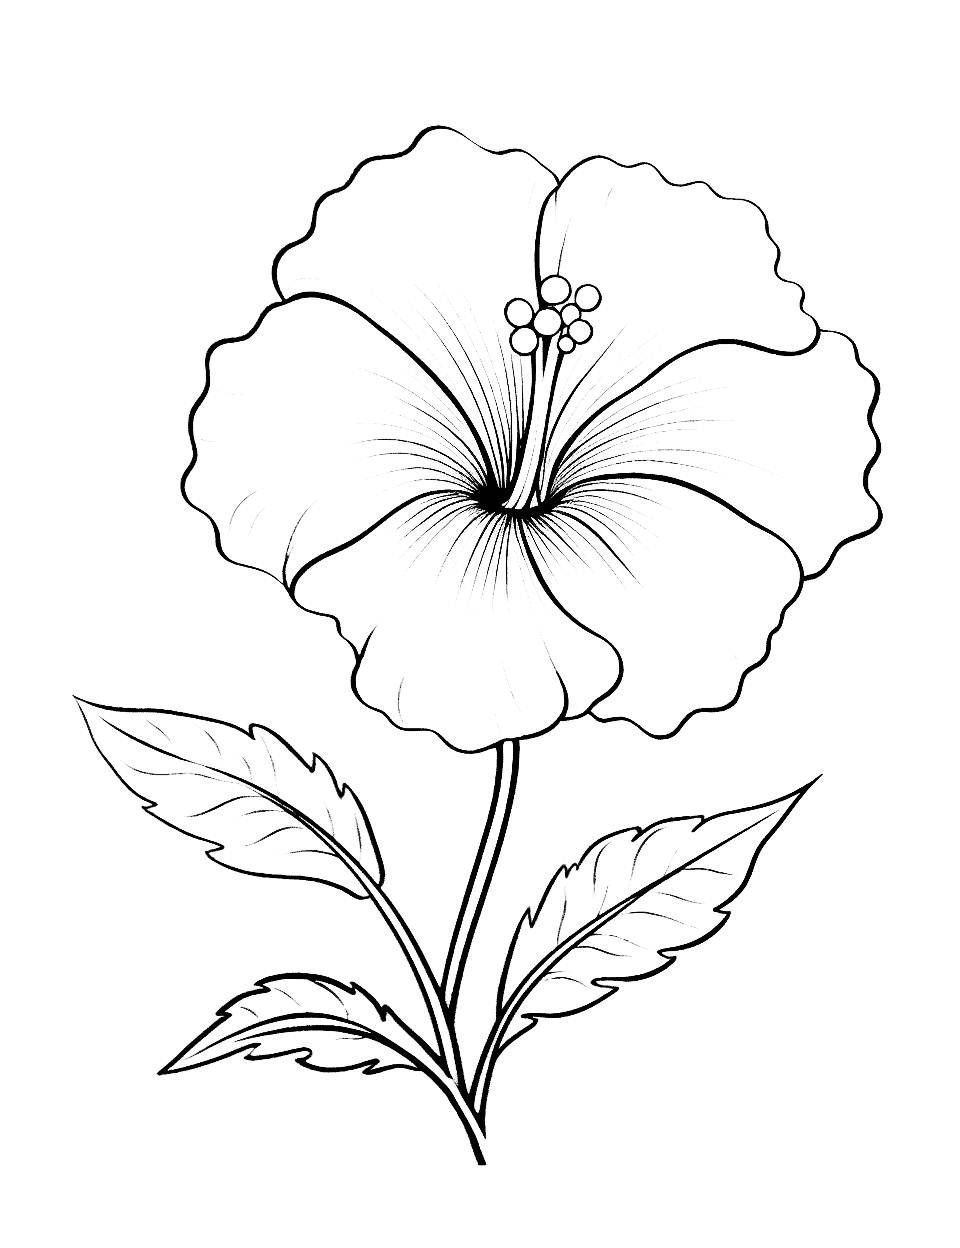 Realistic Tropical Flower Coloring Page - An advanced, detailed coloring page featuring a realistic tropical flower.